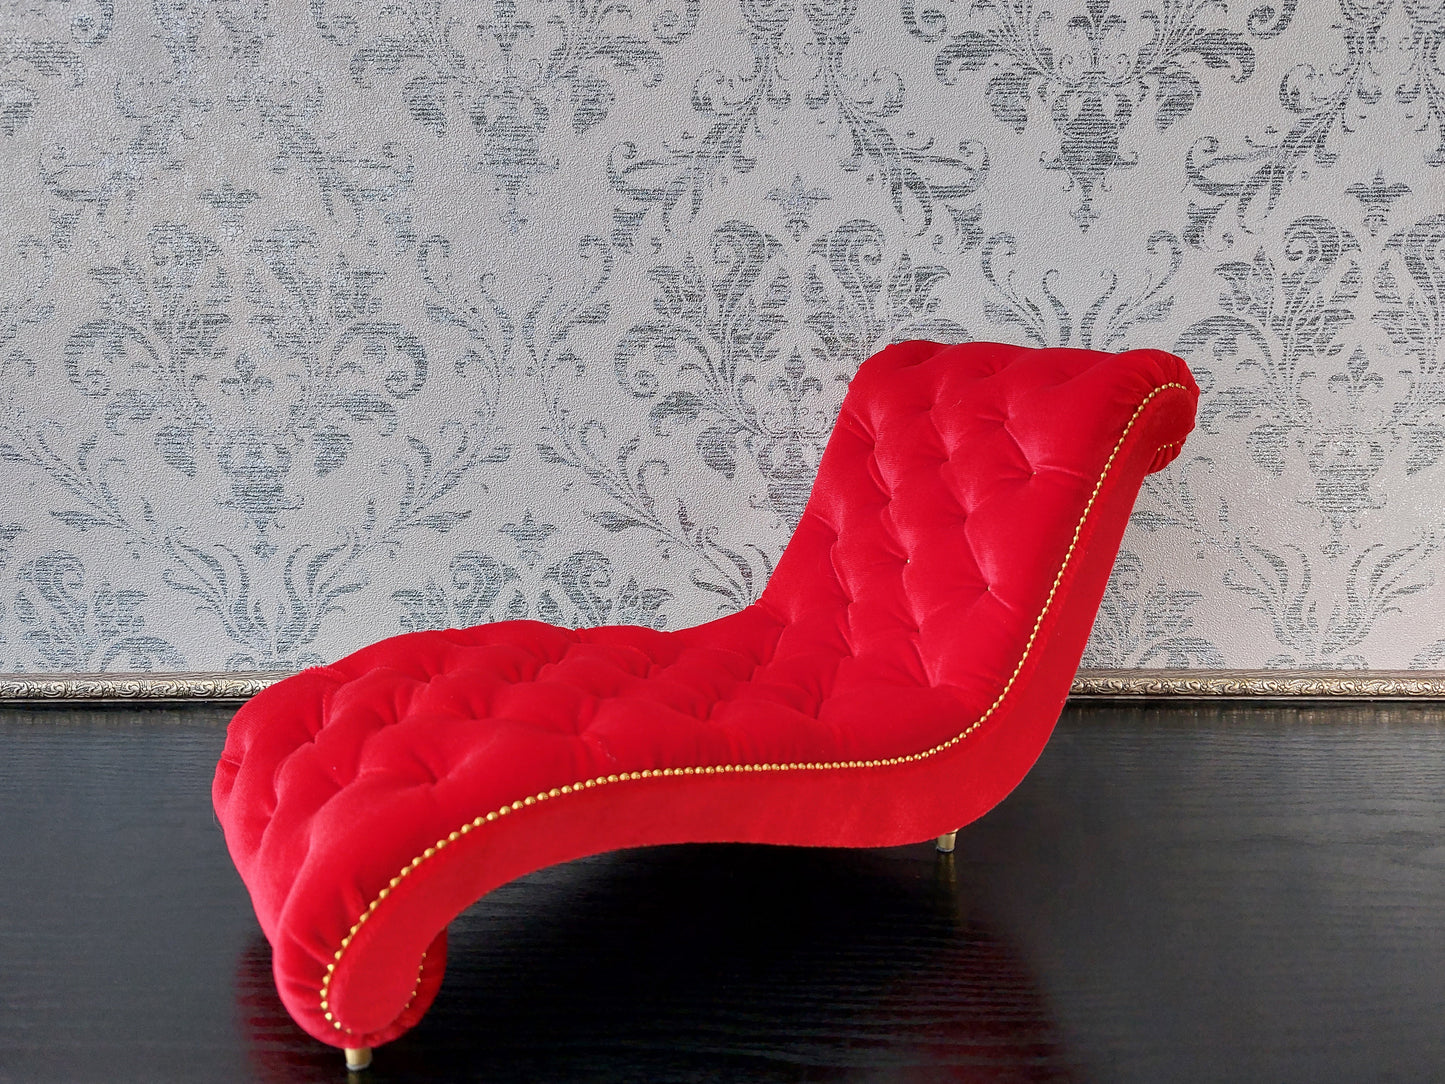 Chaise lounge Wave red